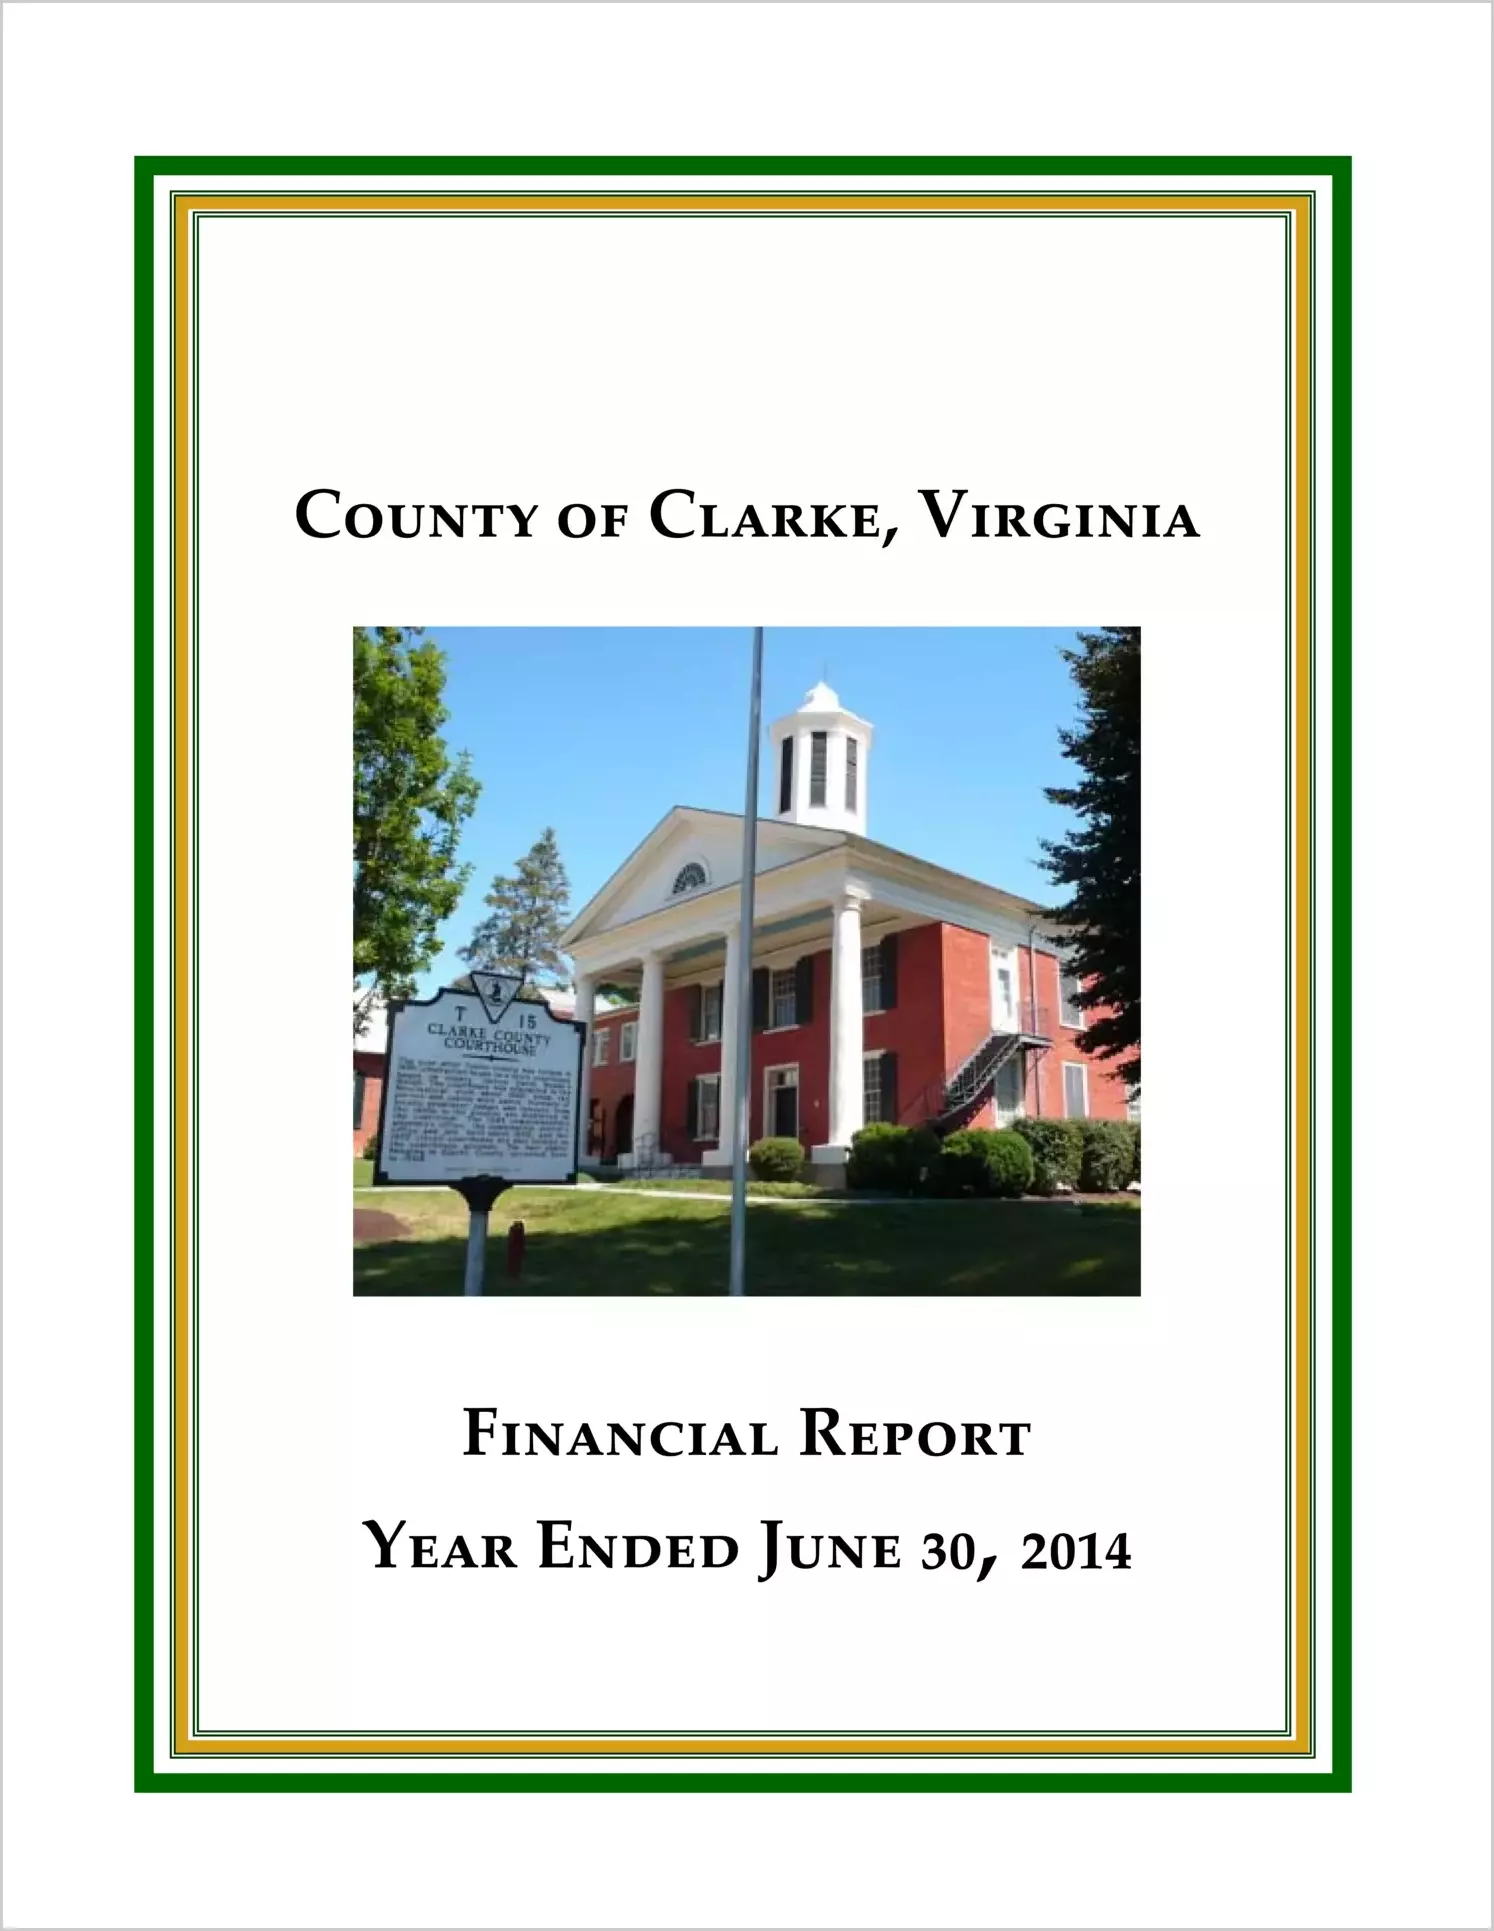 2014 Annual Financial Report for County of Clarke